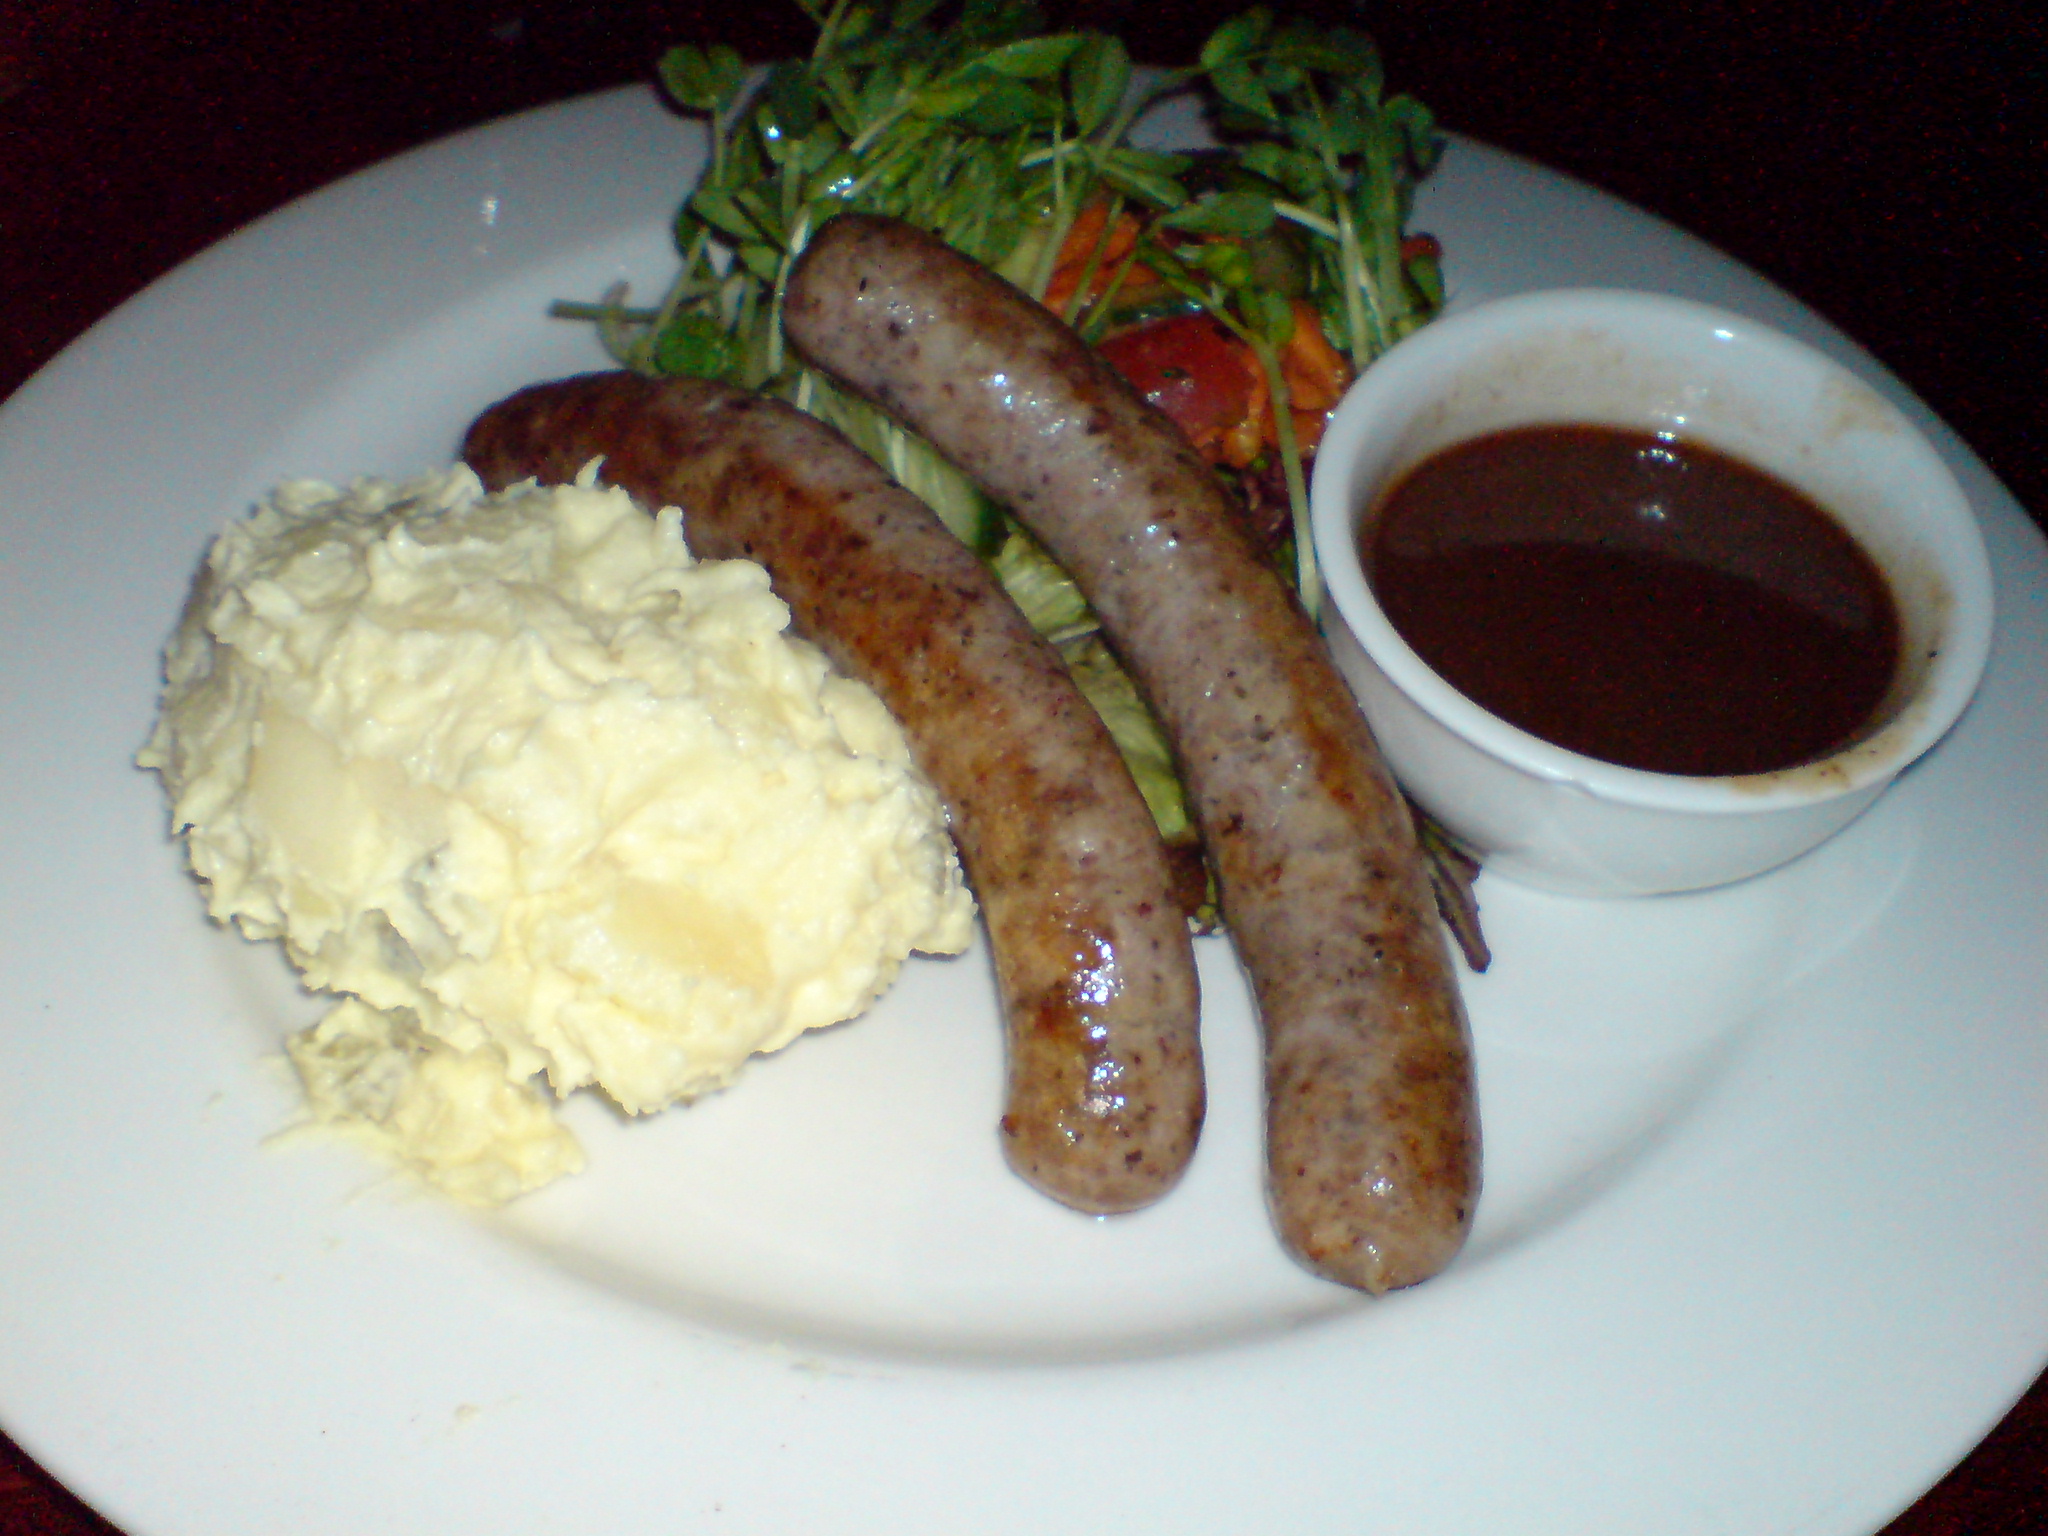 a plate with mashed potatoes and some sausages